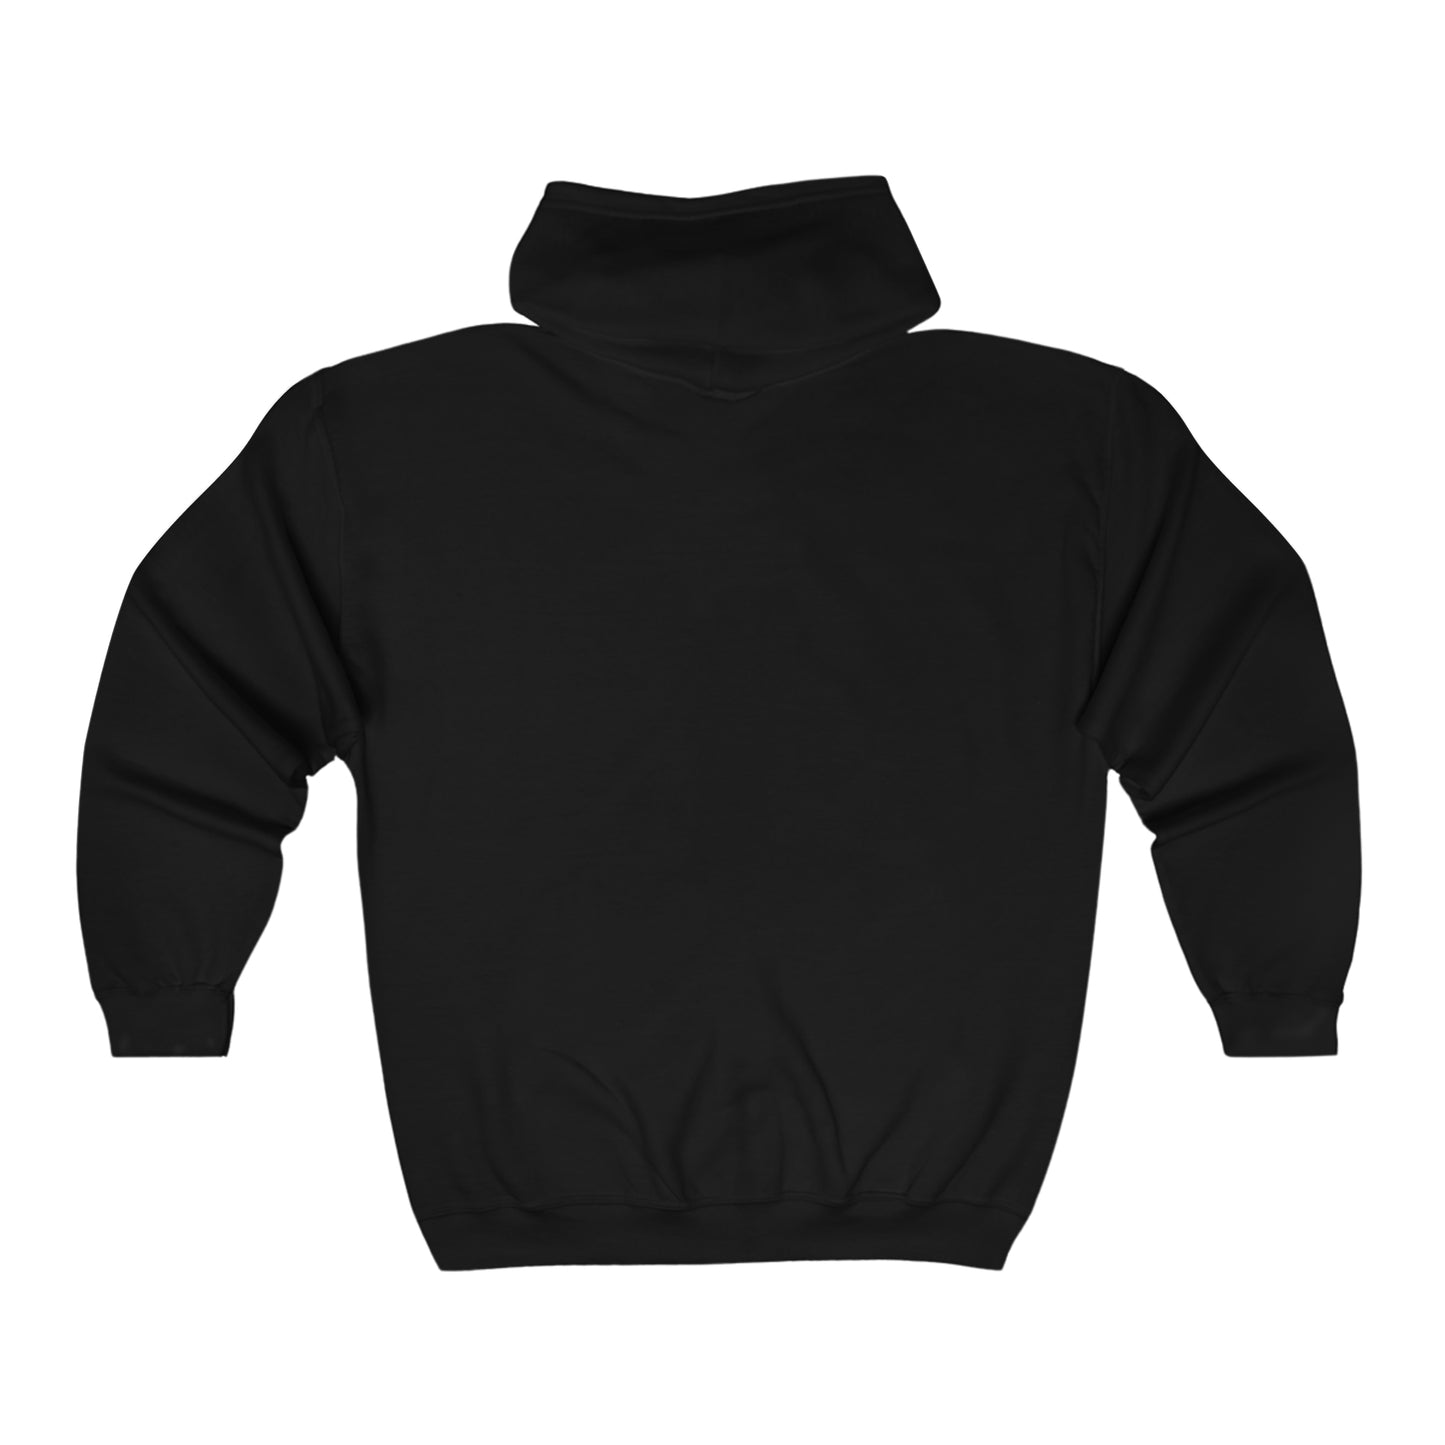 The Great Void (Zip UP)